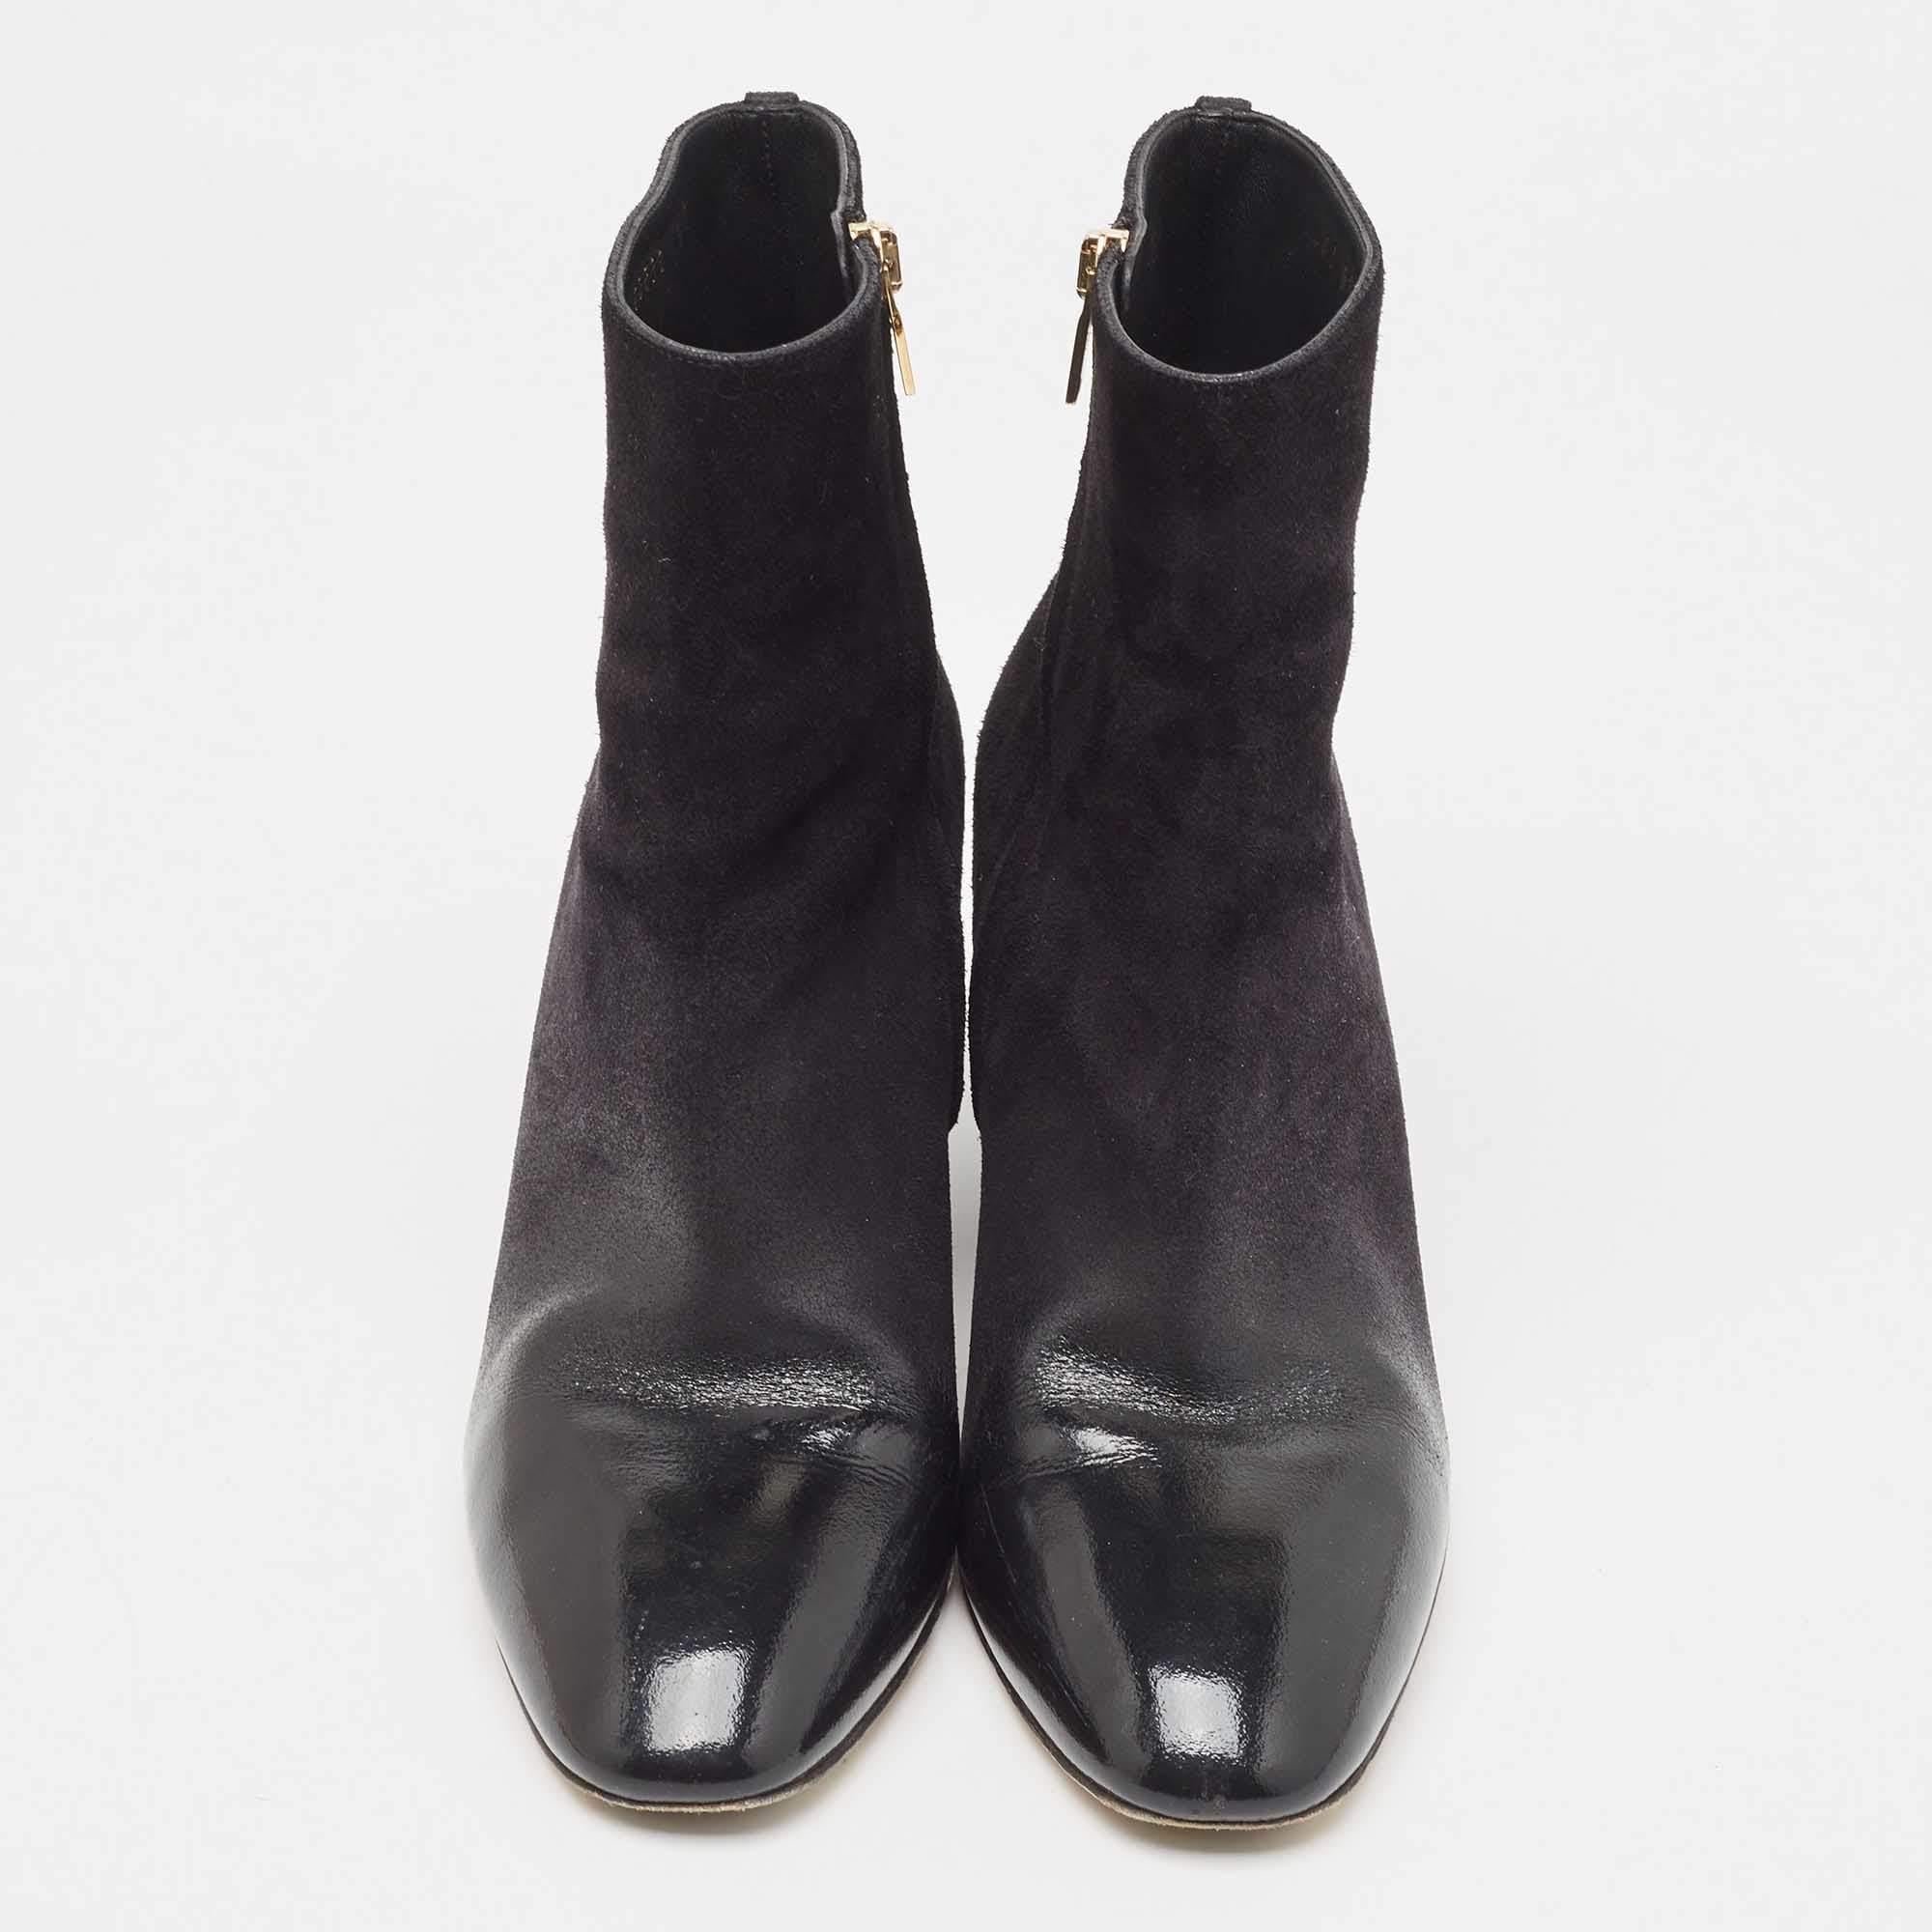 Give your outfit a chic update with this pair of Salvatore Ferragamo ankle boots. The creation is sewn perfectly using patent & leather and added with block heels. Make a statement in these!

Includes
Original Dustbag